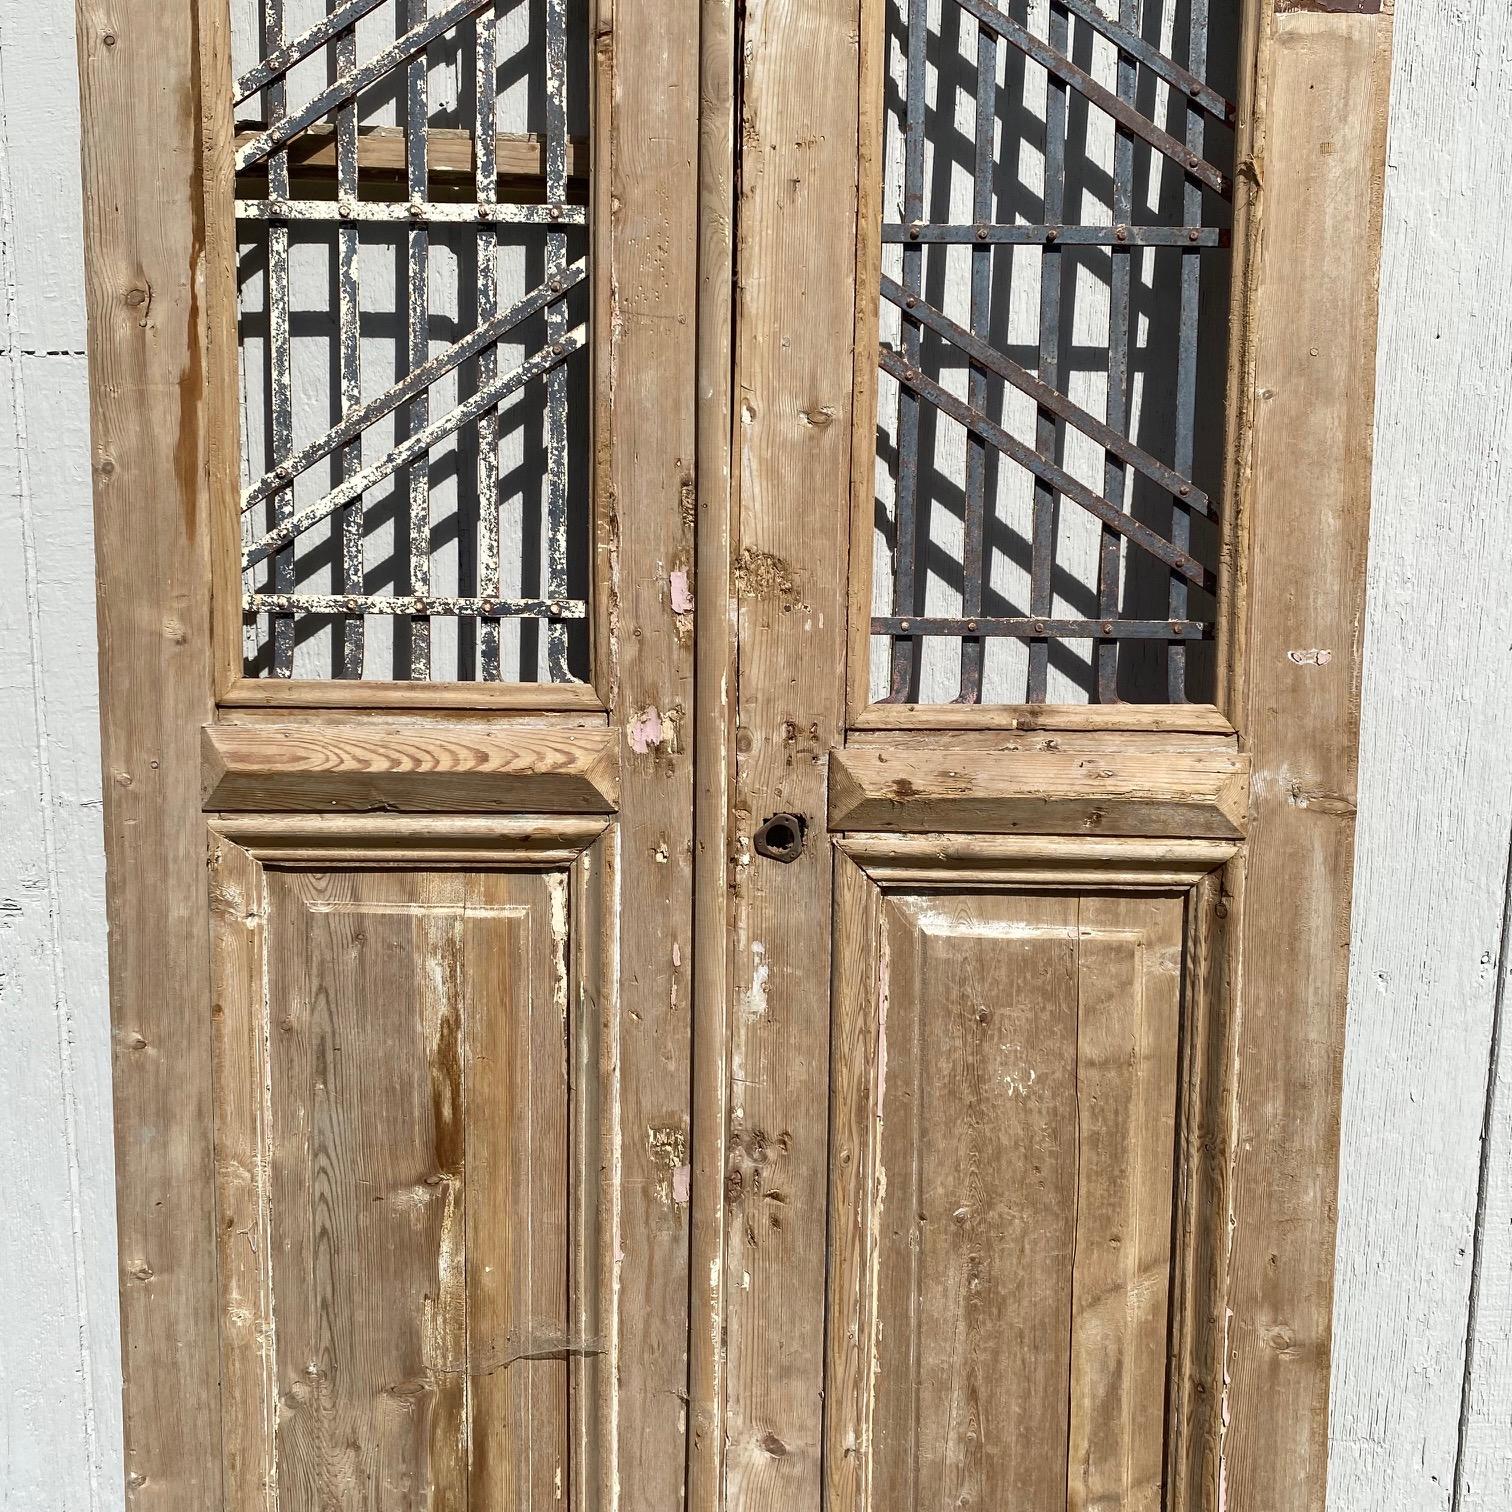 Pair of 19th Century French Paneled Doors with Intricate Wrought Iron Panels For Sale 3